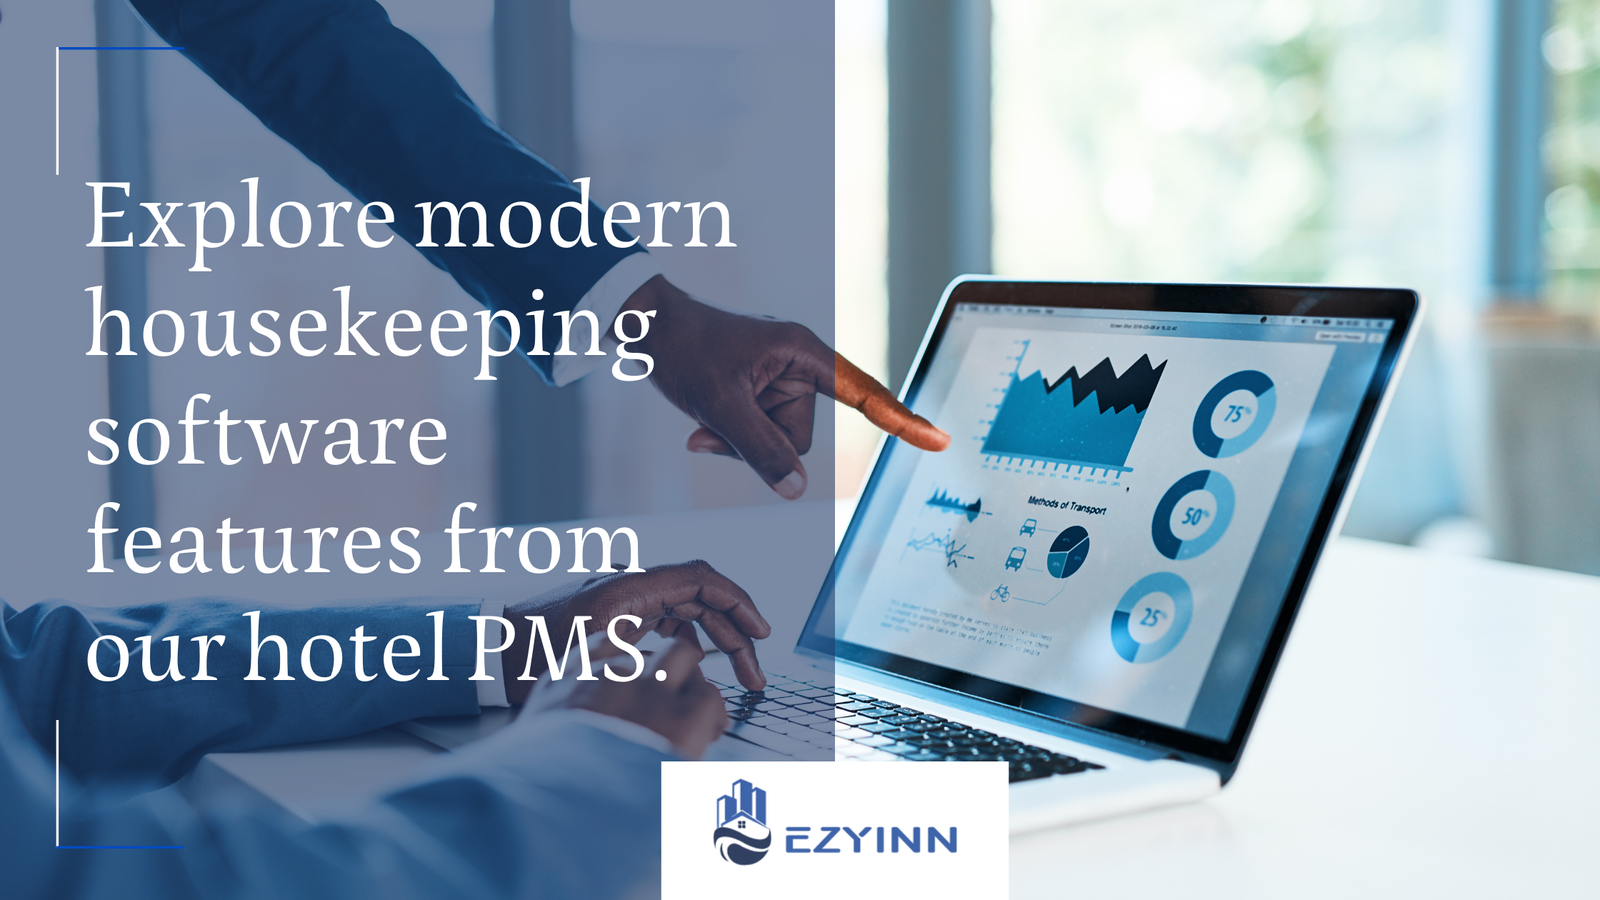 Explore modern housekeeping software features from our hotel PMS. | Ezyinn PMS